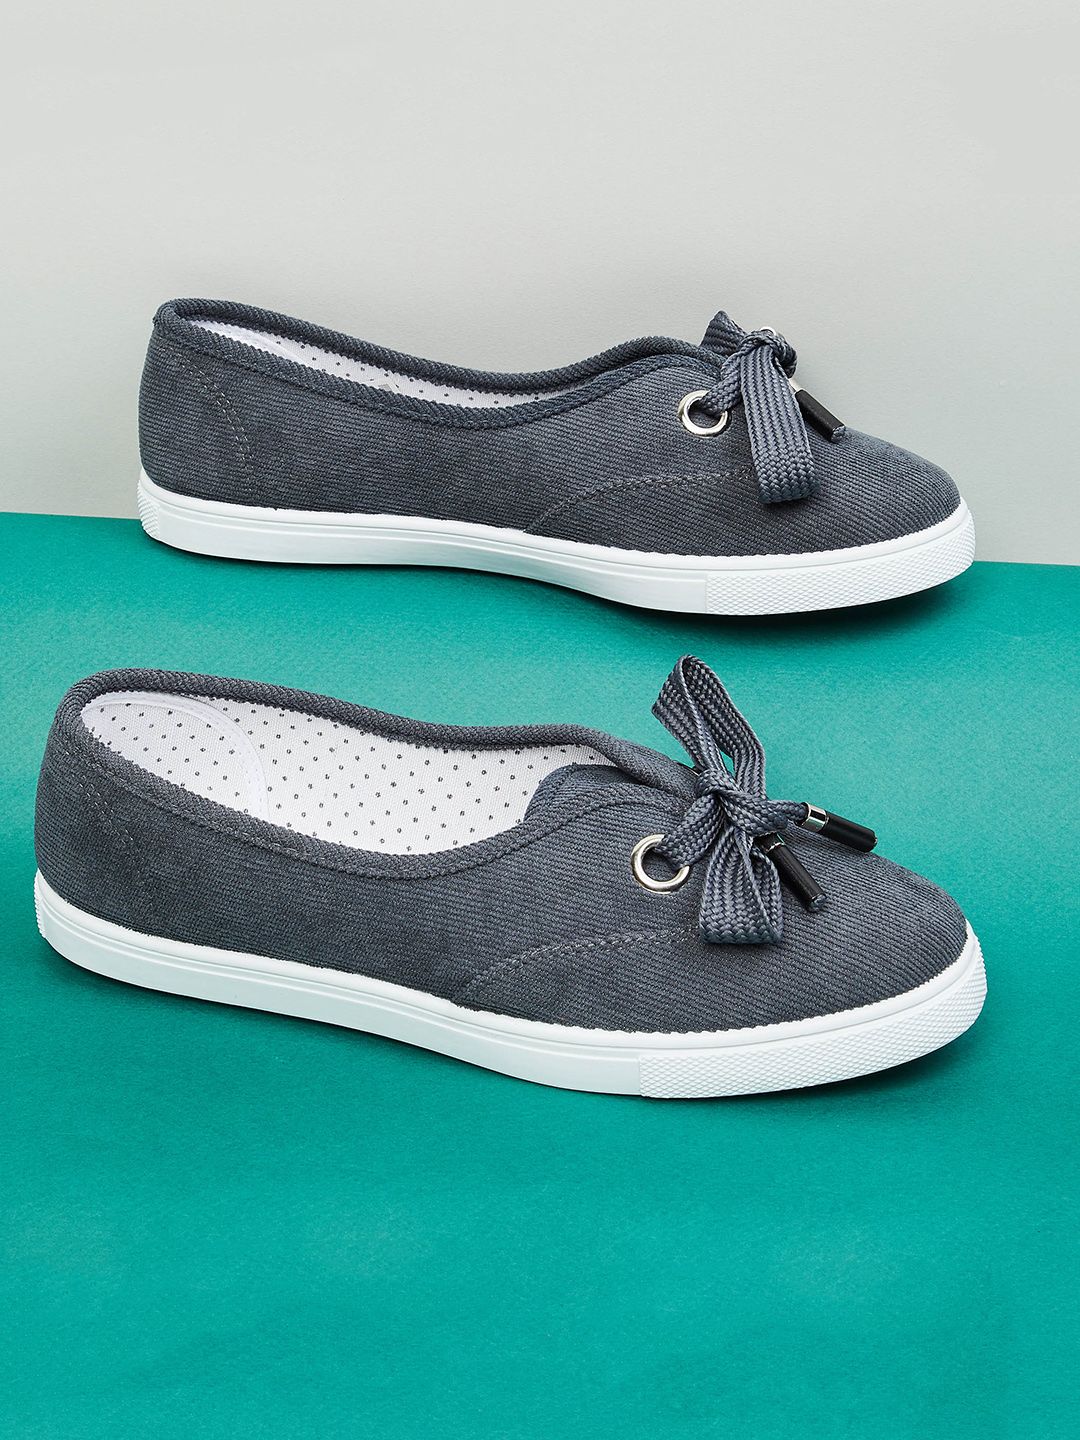 max Women Grey Textured PU Slip-On Sneakers Price in India